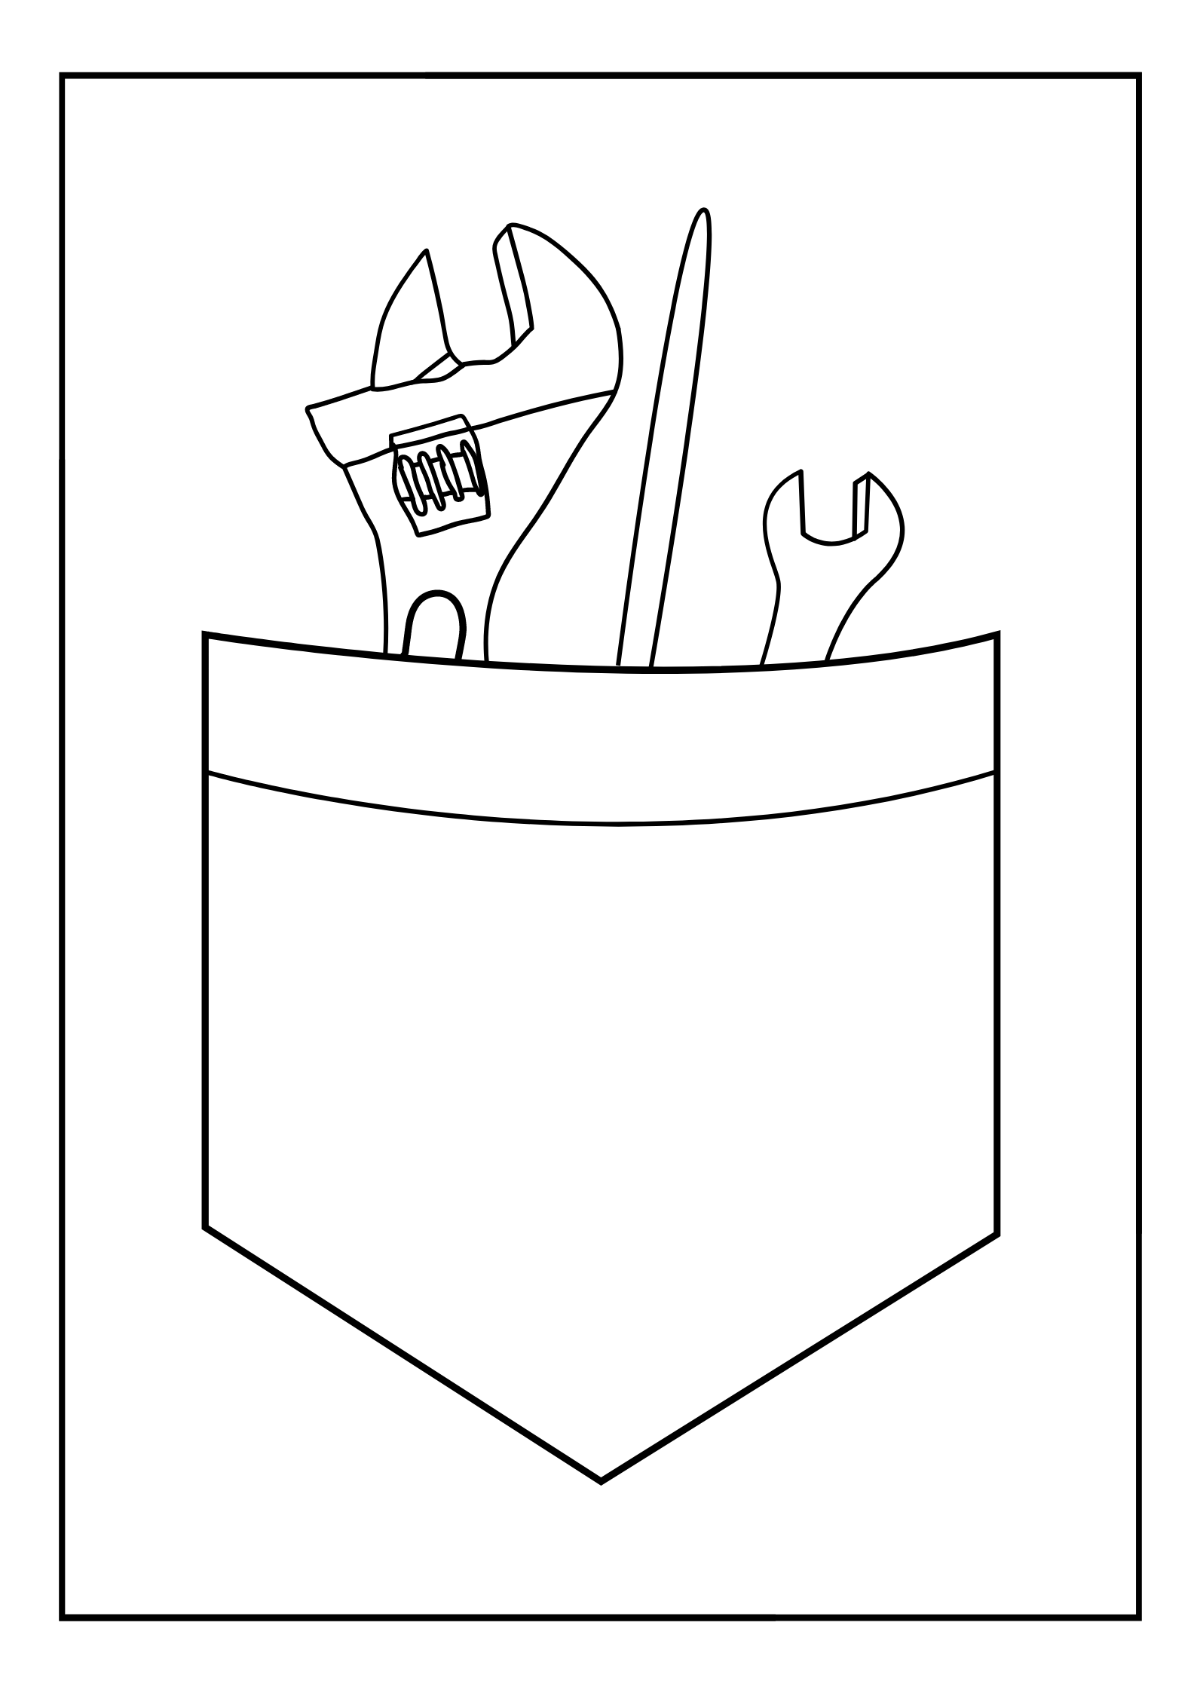 Labor Day Image Drawing Template